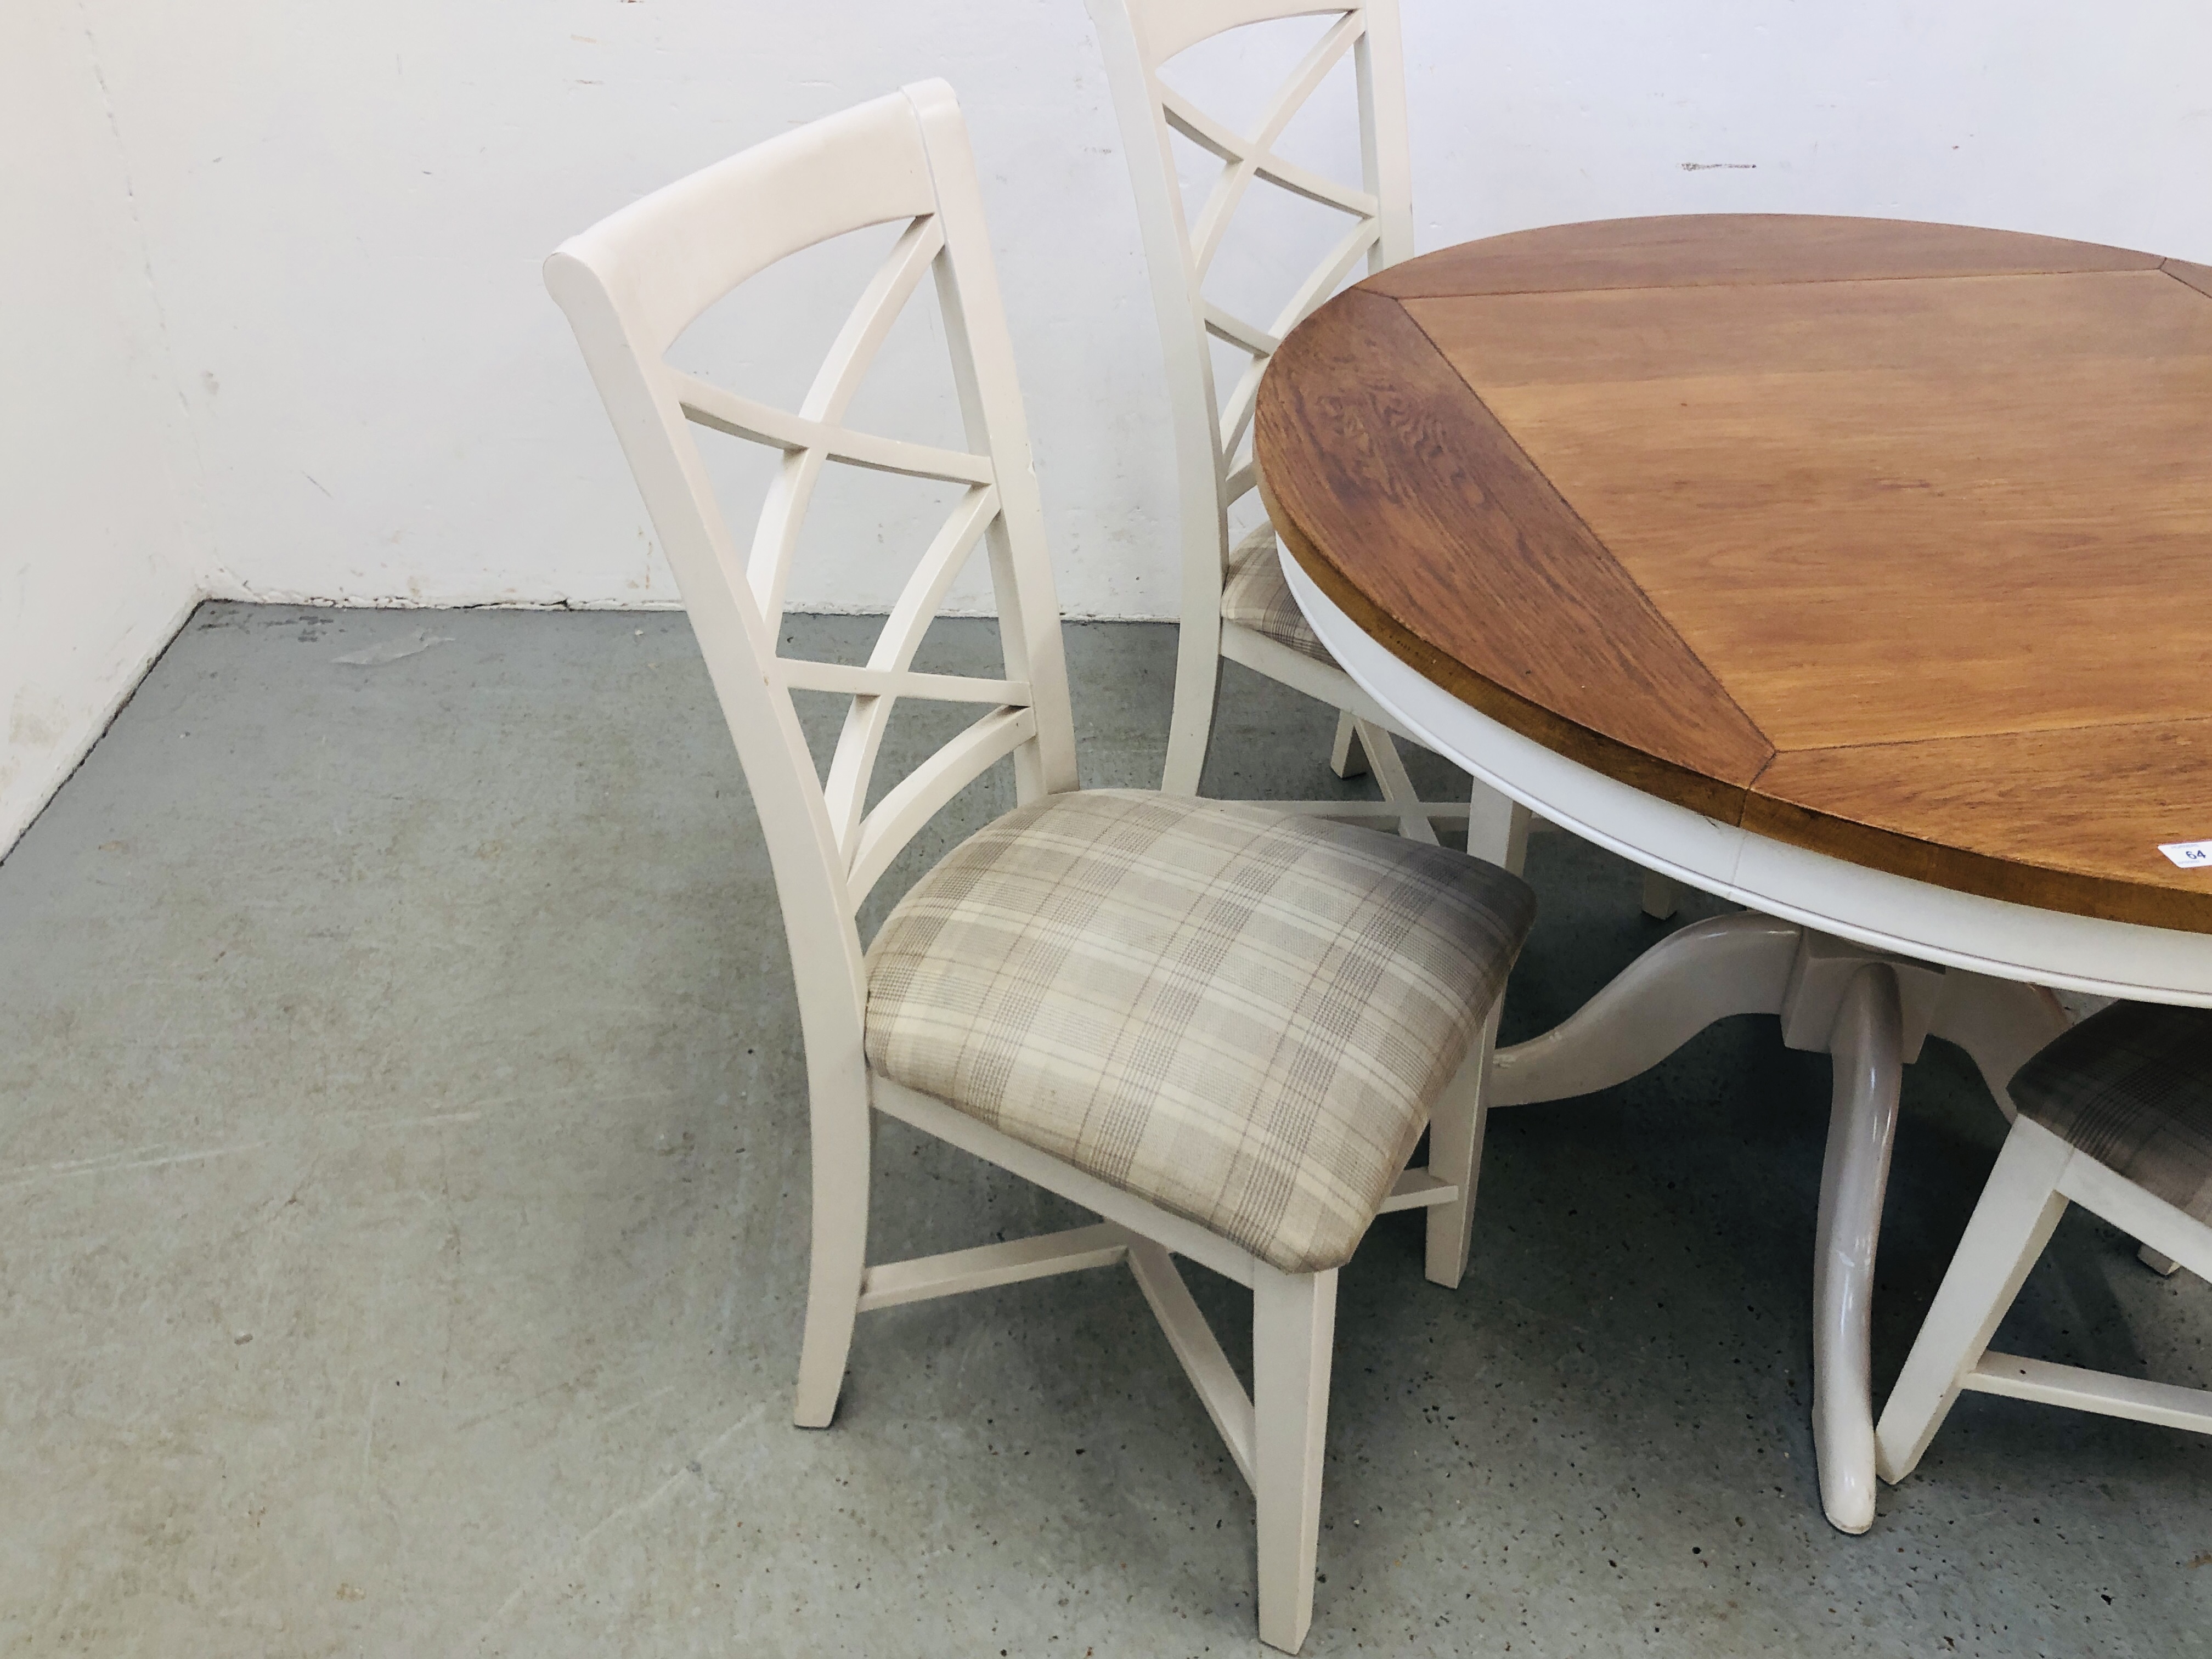 A MODERN CIRCULAR DINING TABLE COMPLETE WITH 4 CHAIRS - Image 3 of 6